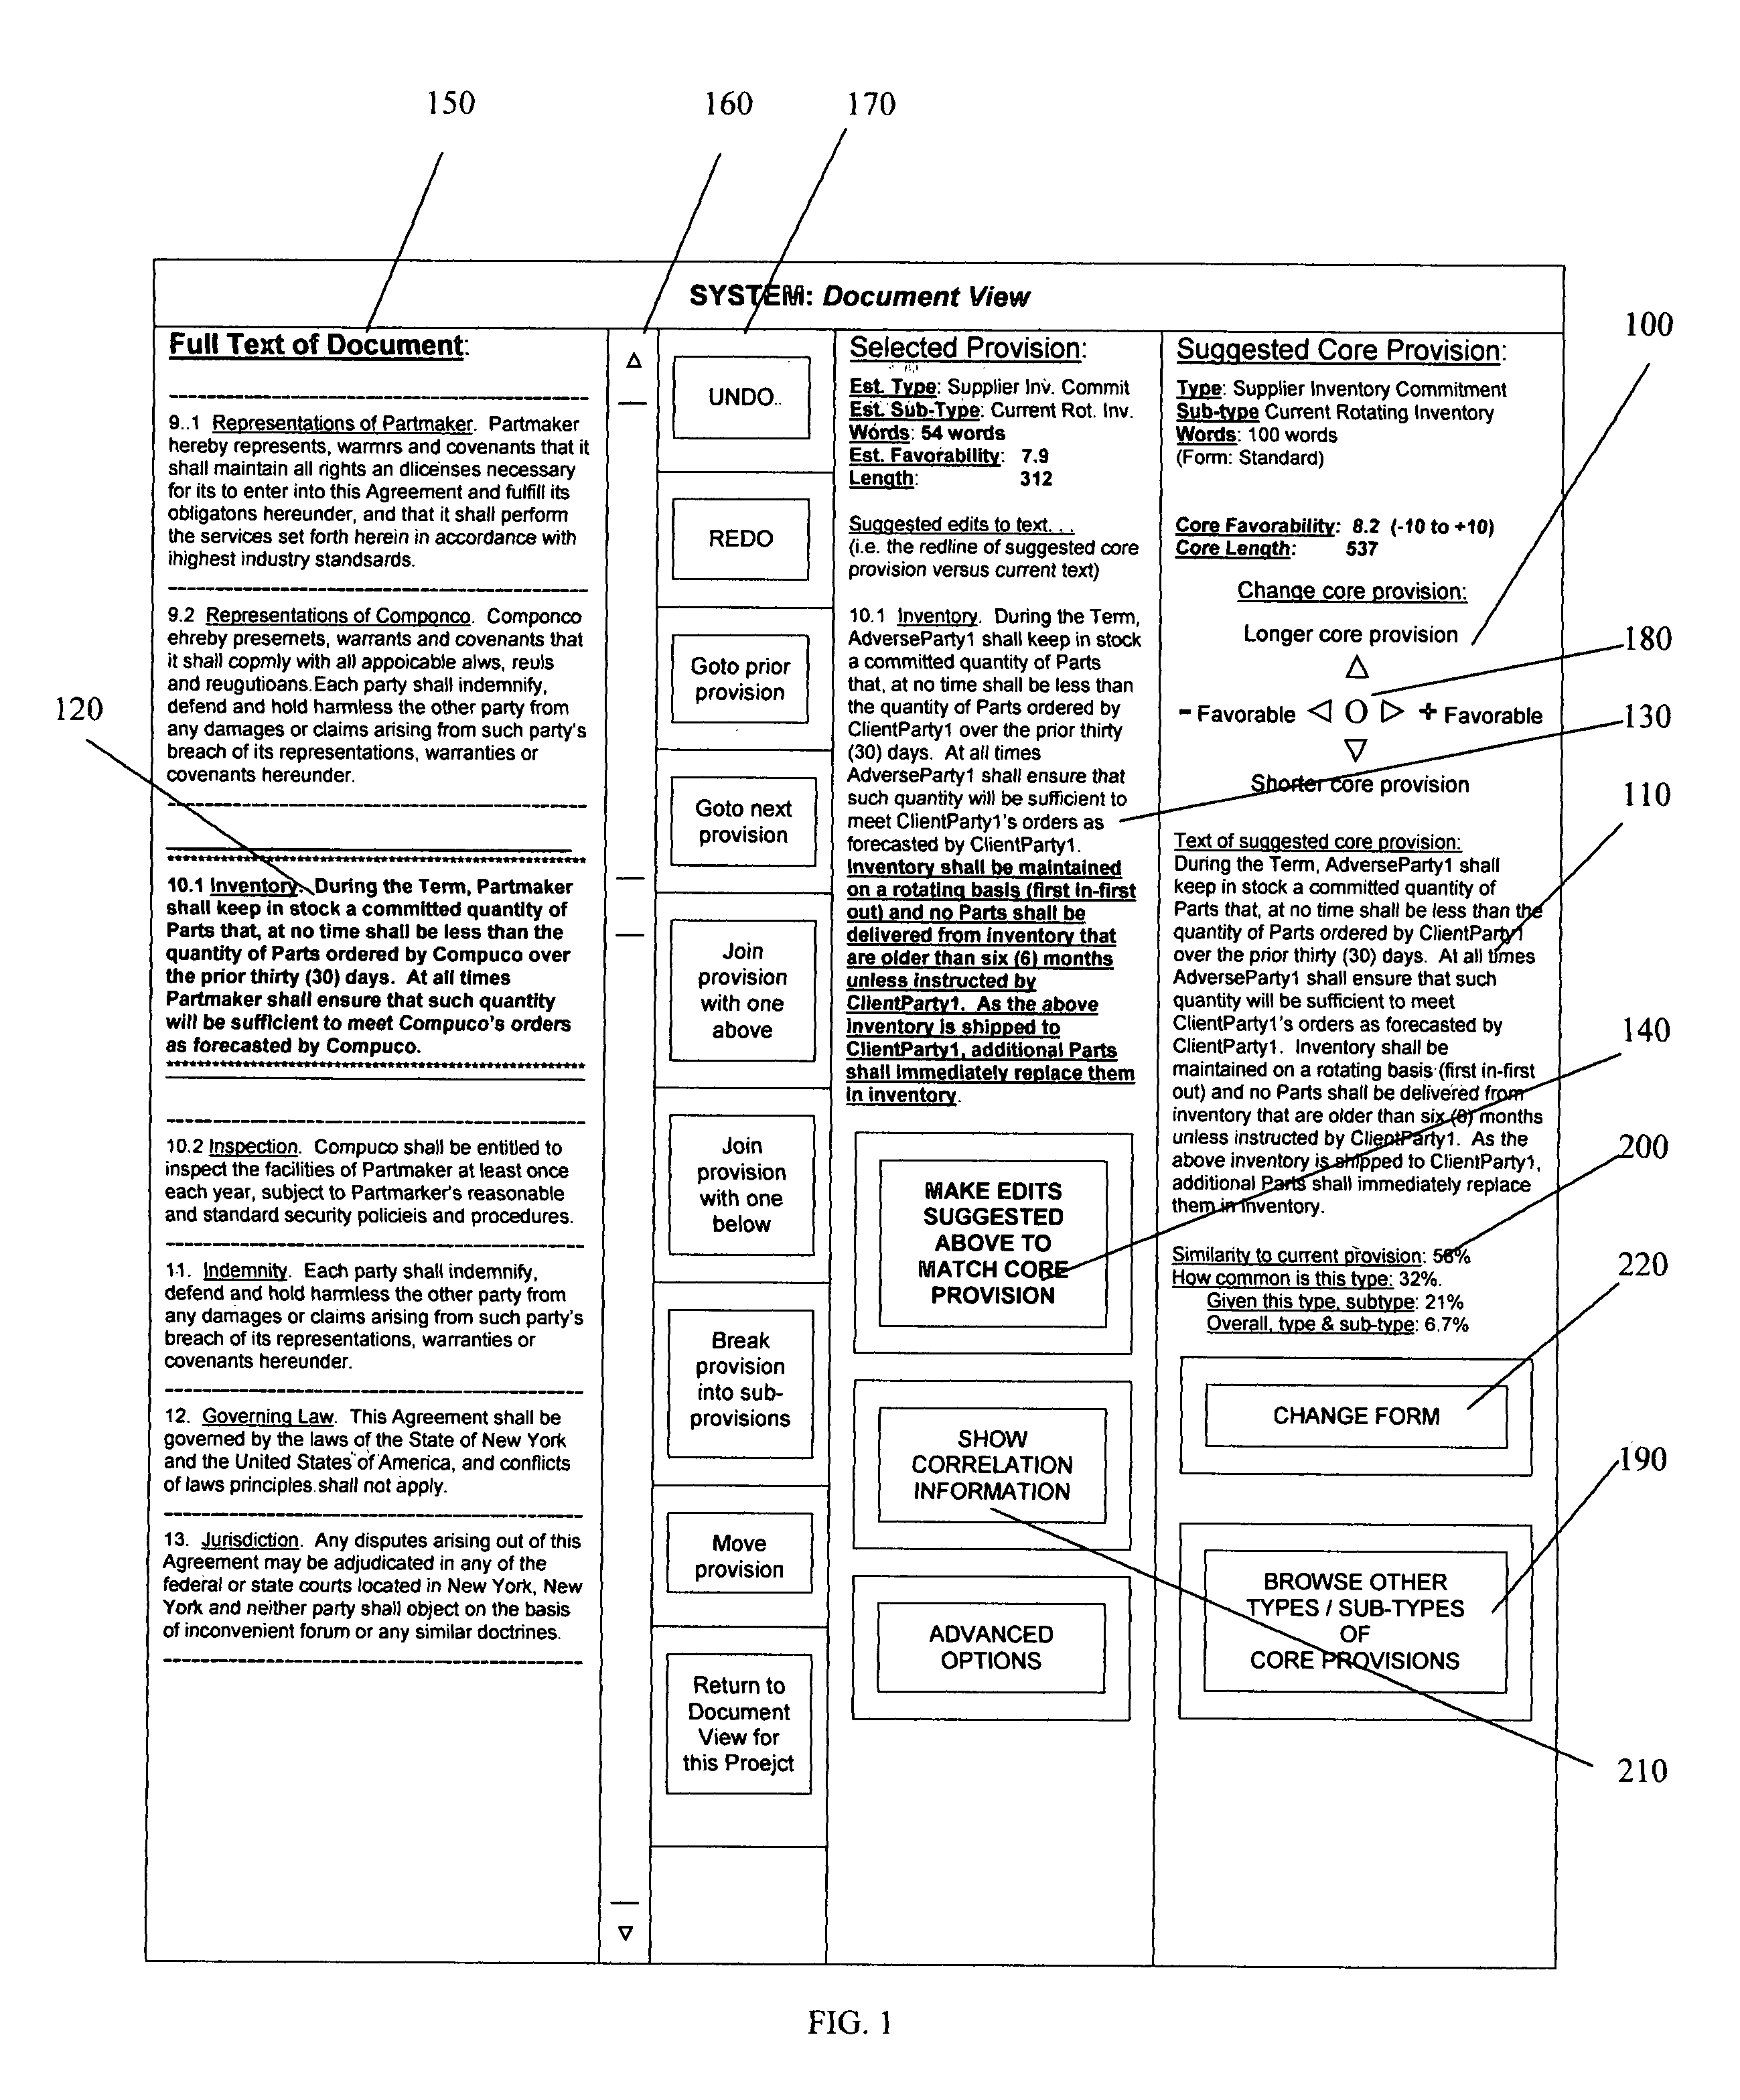 Computer editing system for common textual patterns in legal documents